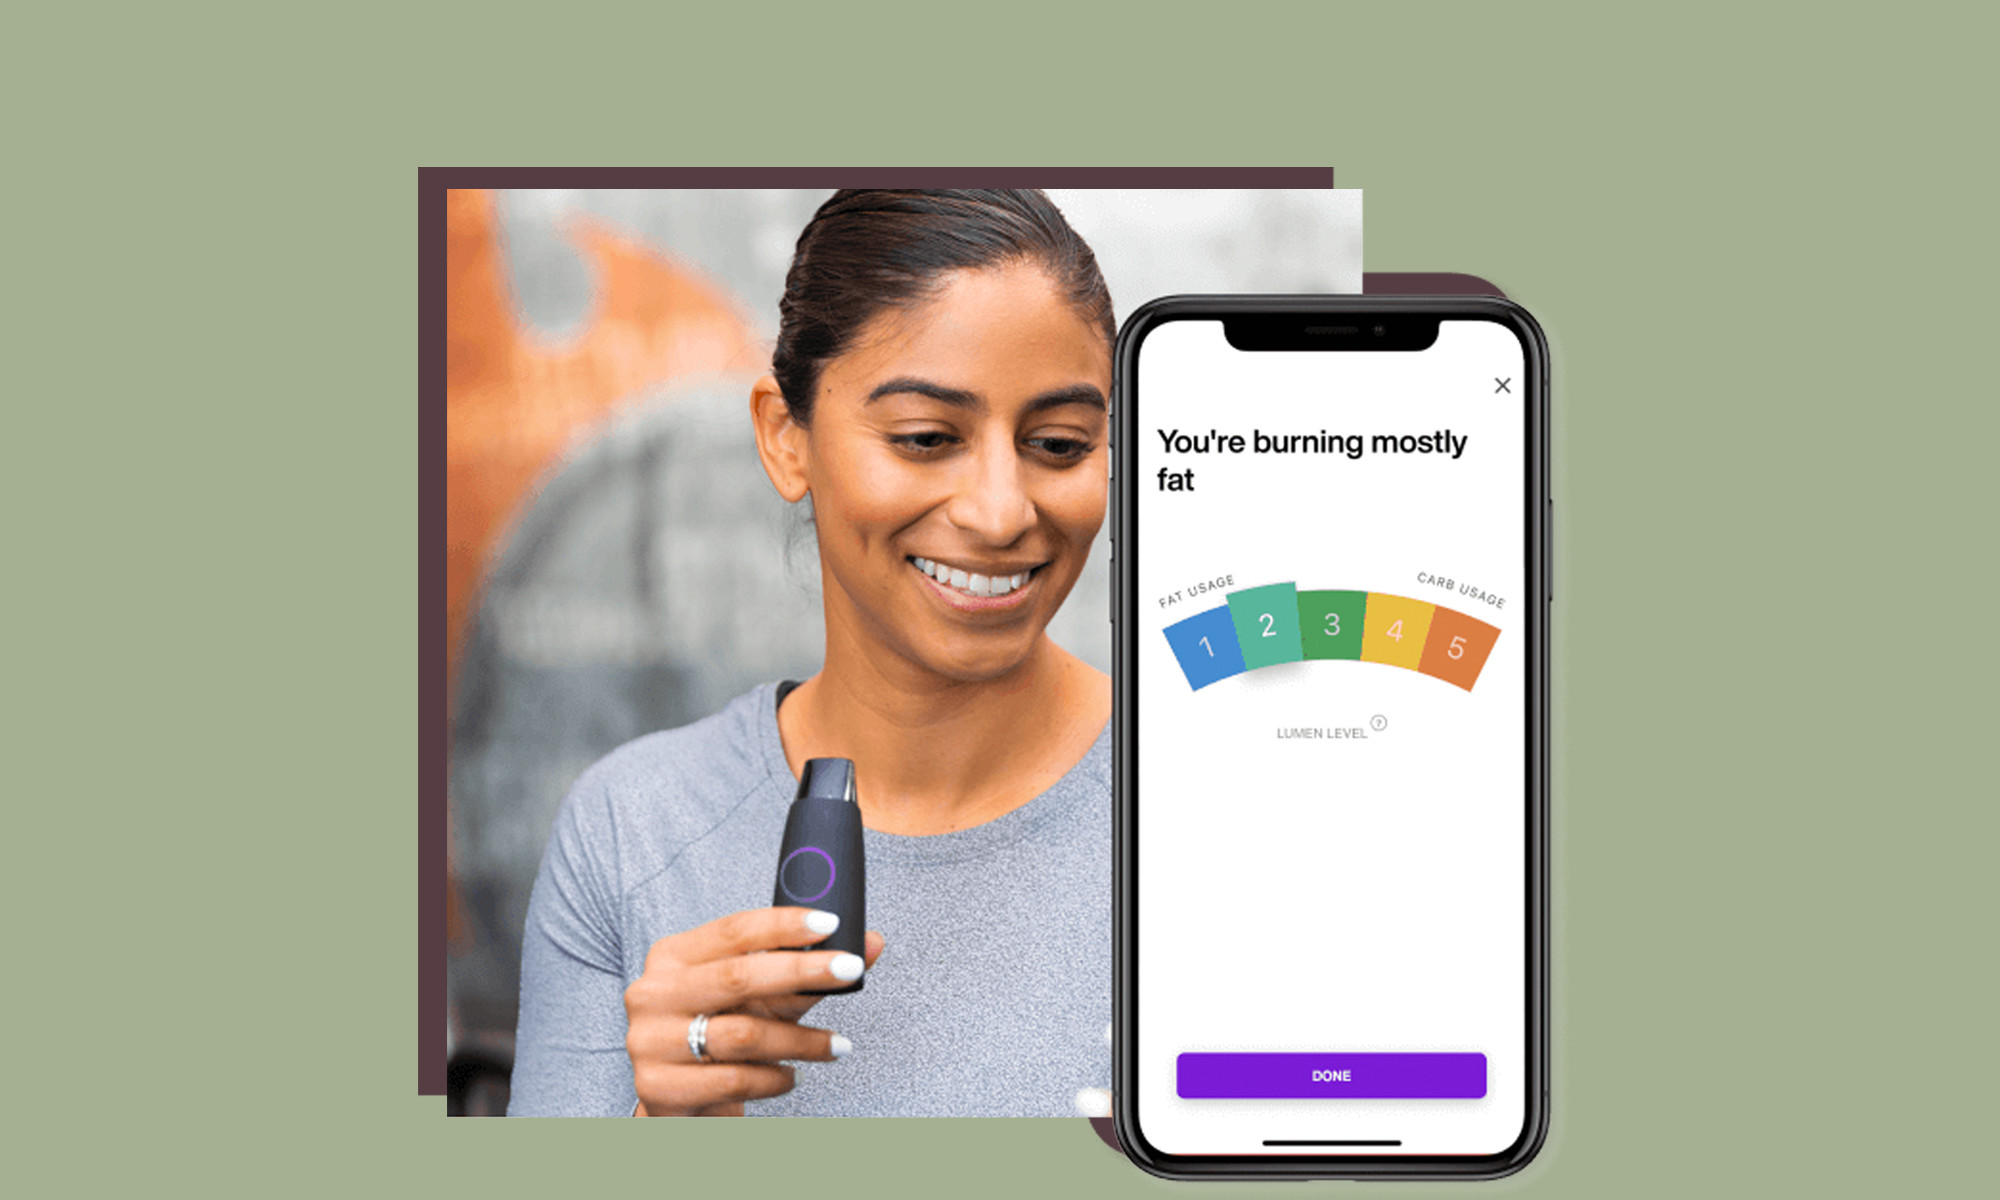 Lumen Review - A portable, metabolism tracker to reach your